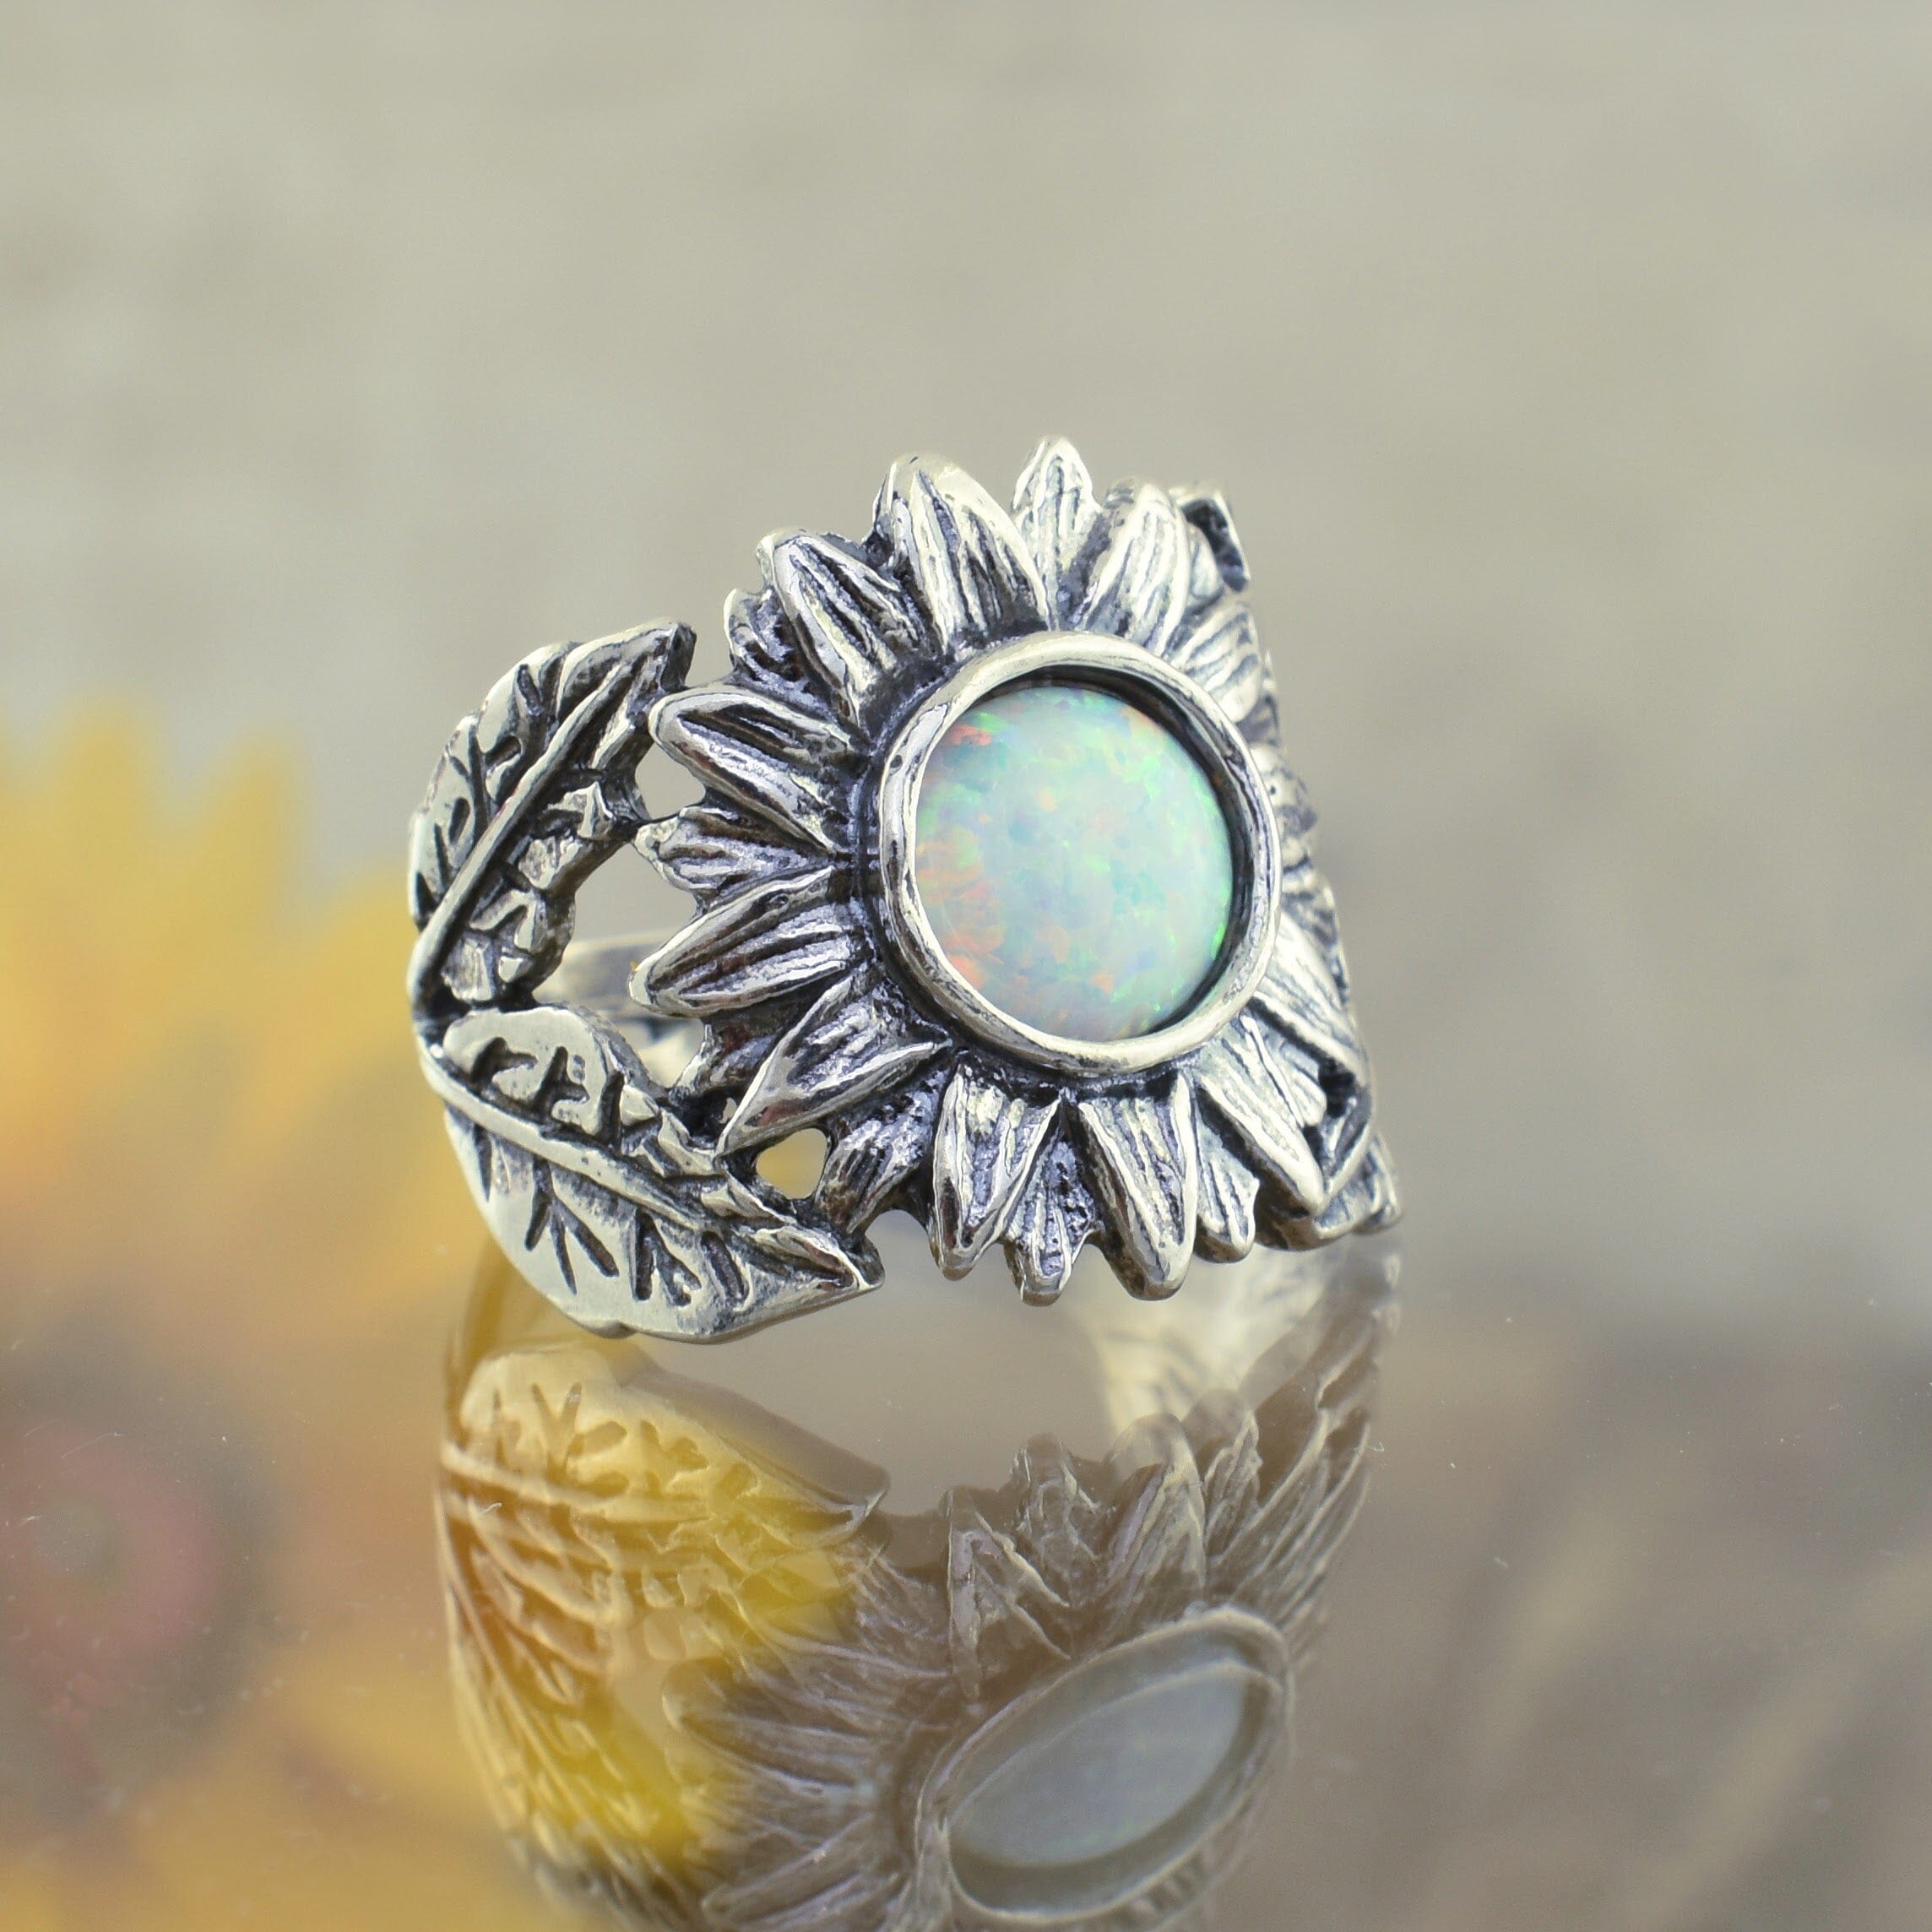 .925 sterling silver & reconstructed opal bloom ring